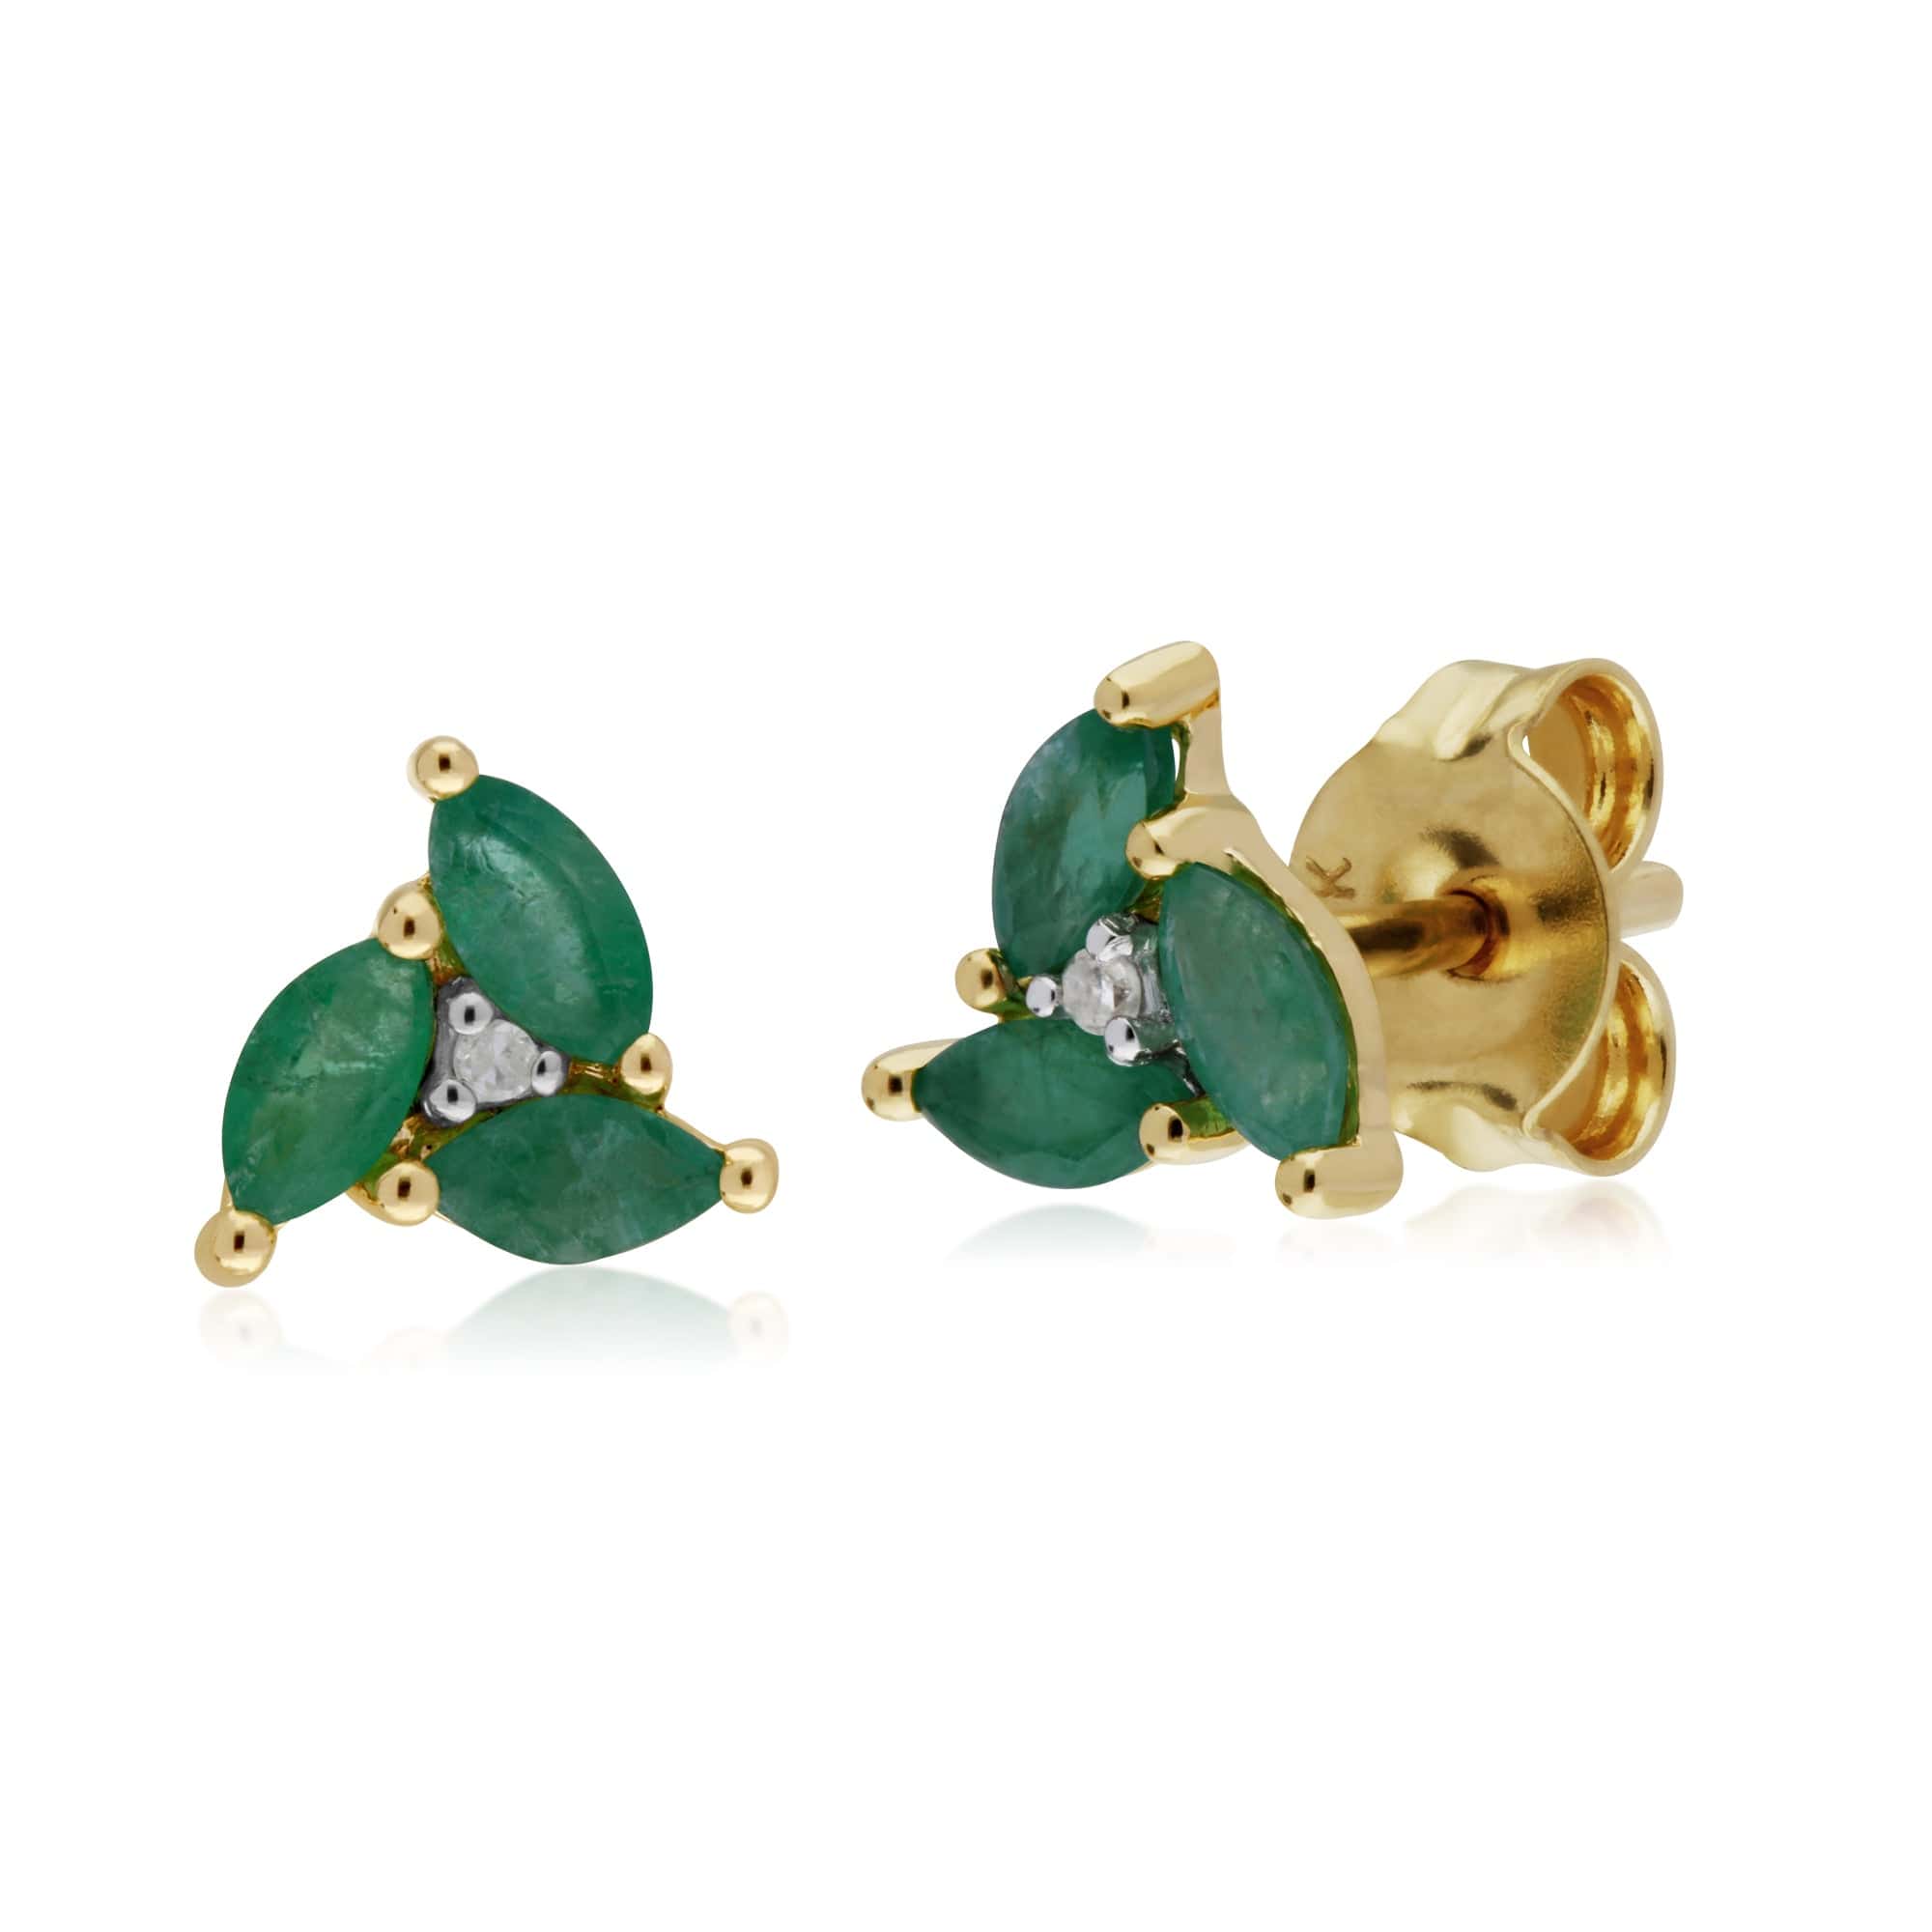 Floral Marquise Emerald & Diamond Stud Earrings in 9ct Yellow Gold